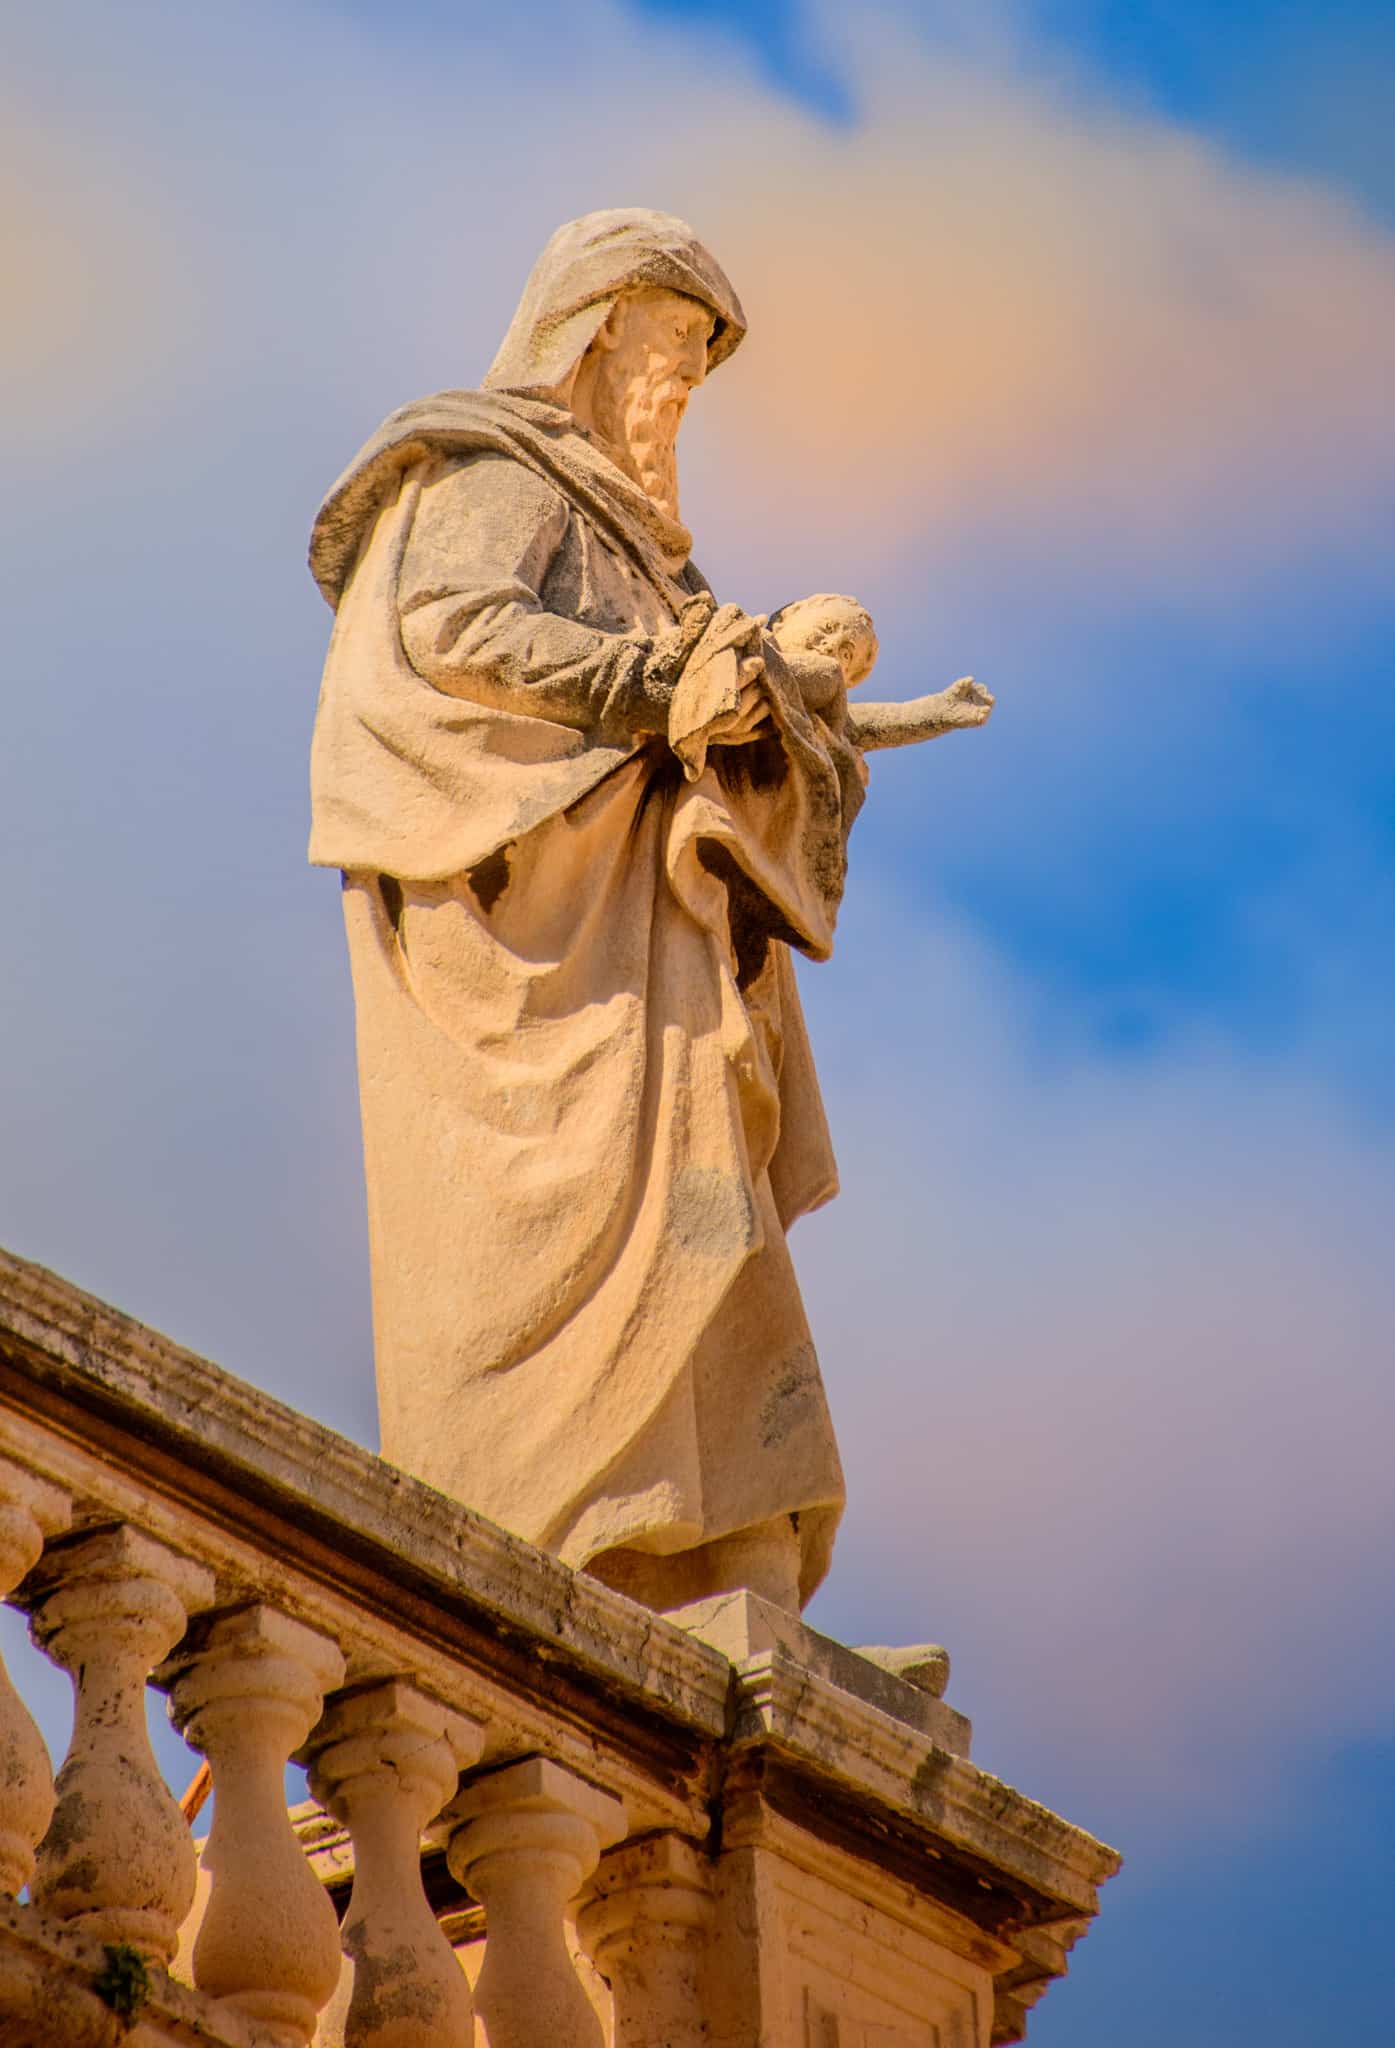 A close-up of one of the many statues that adorn the parapets of the Dubrovnik Cathedral in Dubrovnik Old Town in Croatia.